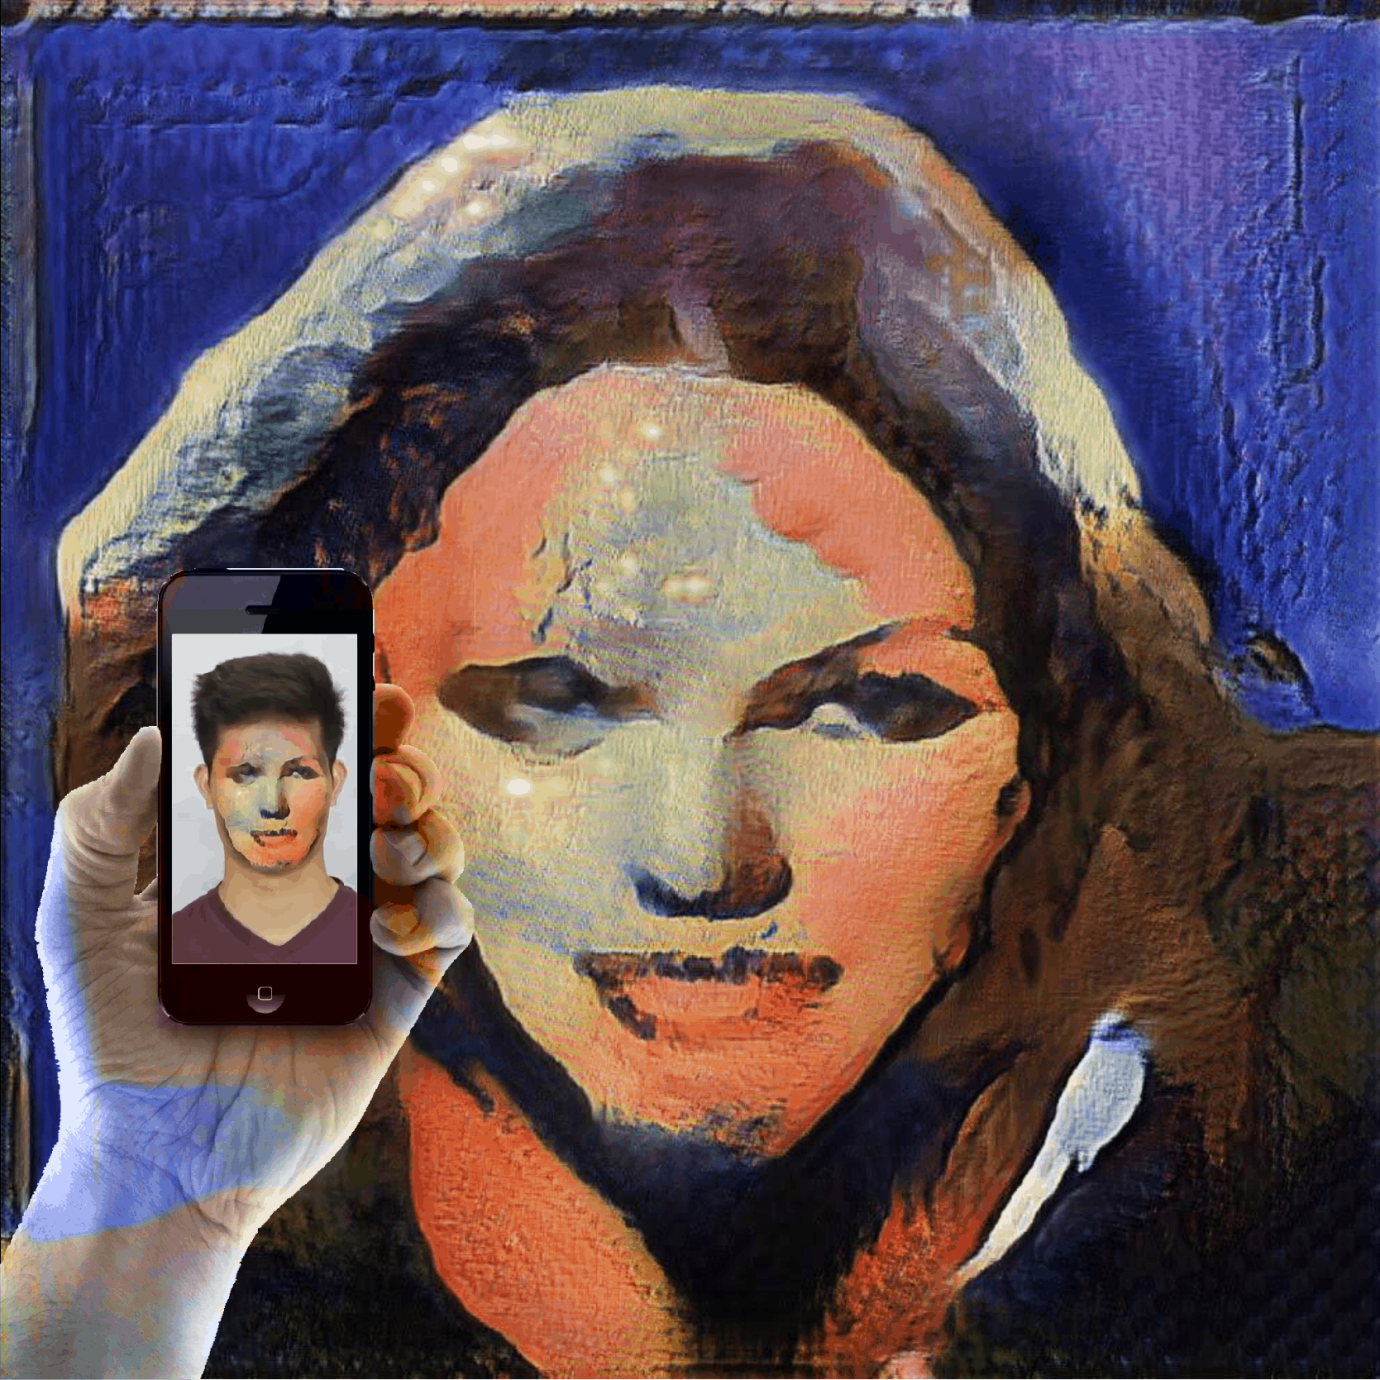 AN AI generated face made using a GAN. the face is feminine looking in striking peaches and blues and heavy appearing makeup. In front of it shows a hand holding a phone with the face of the generated image applied to the person in the phone.